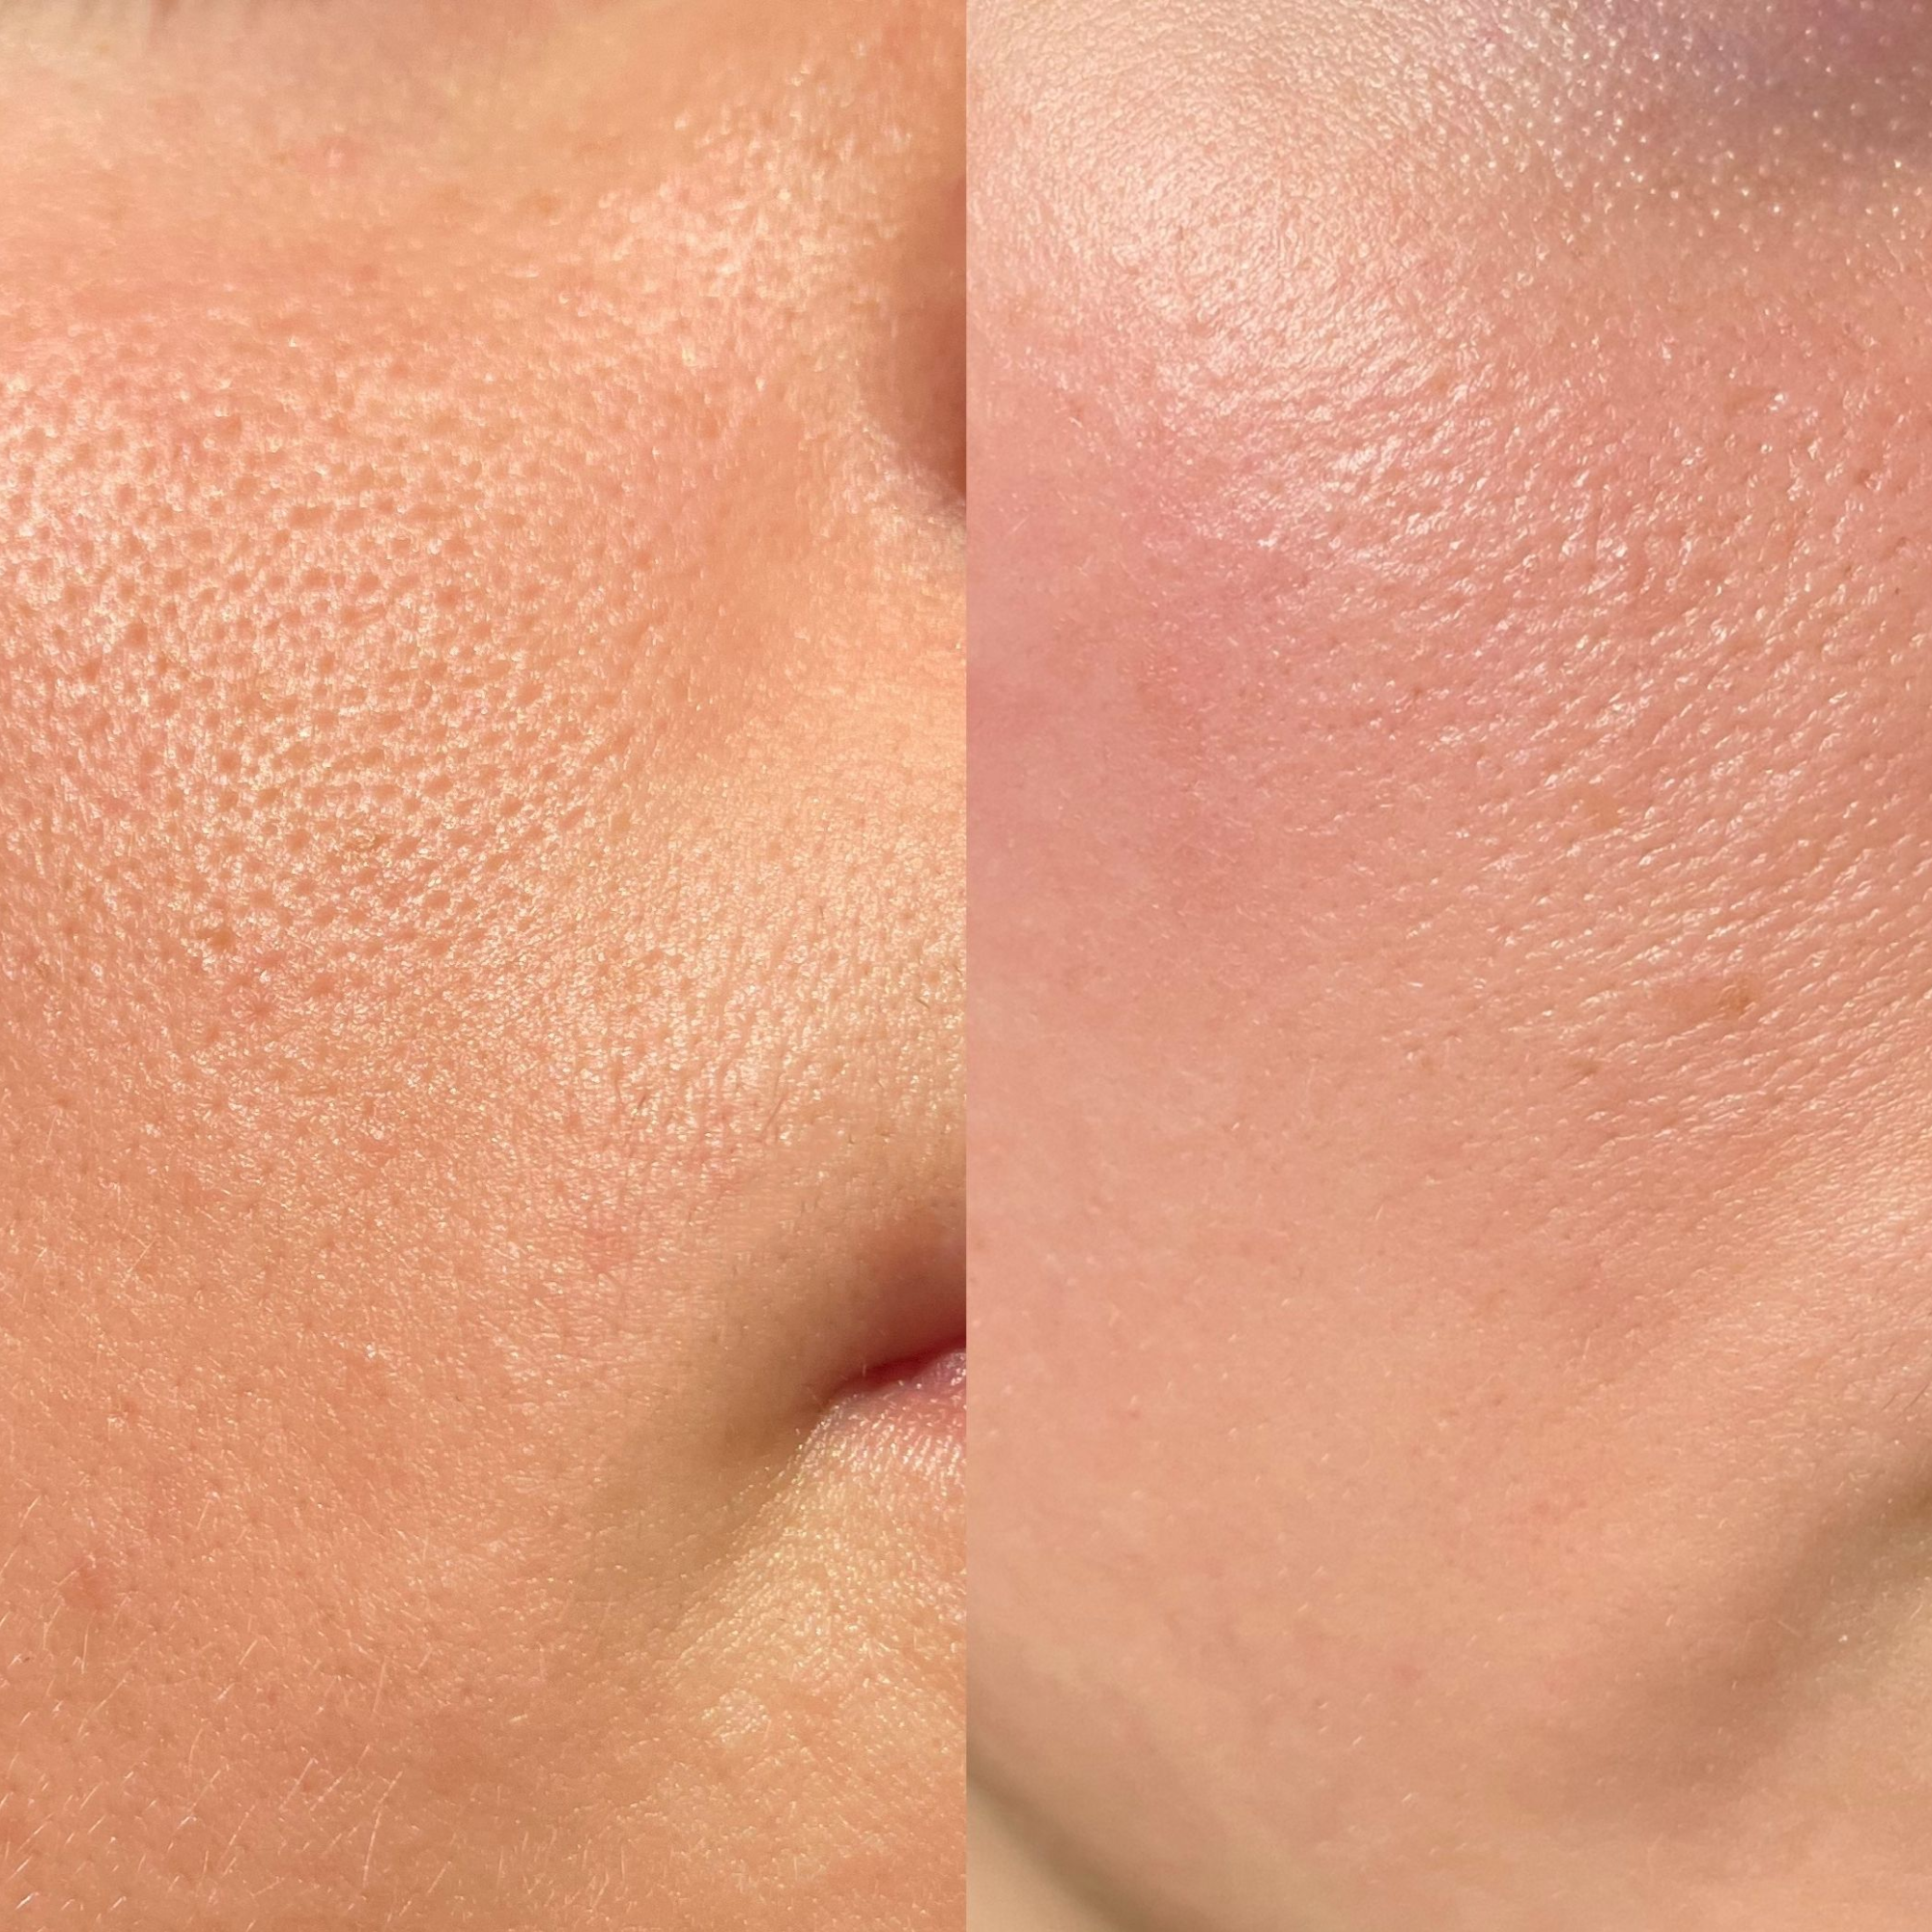 Before and after comparison demonstrating significant large pore improvement with No More Make Up Skin Corrector, showcasing visibly refined and smoother skin texture after use.